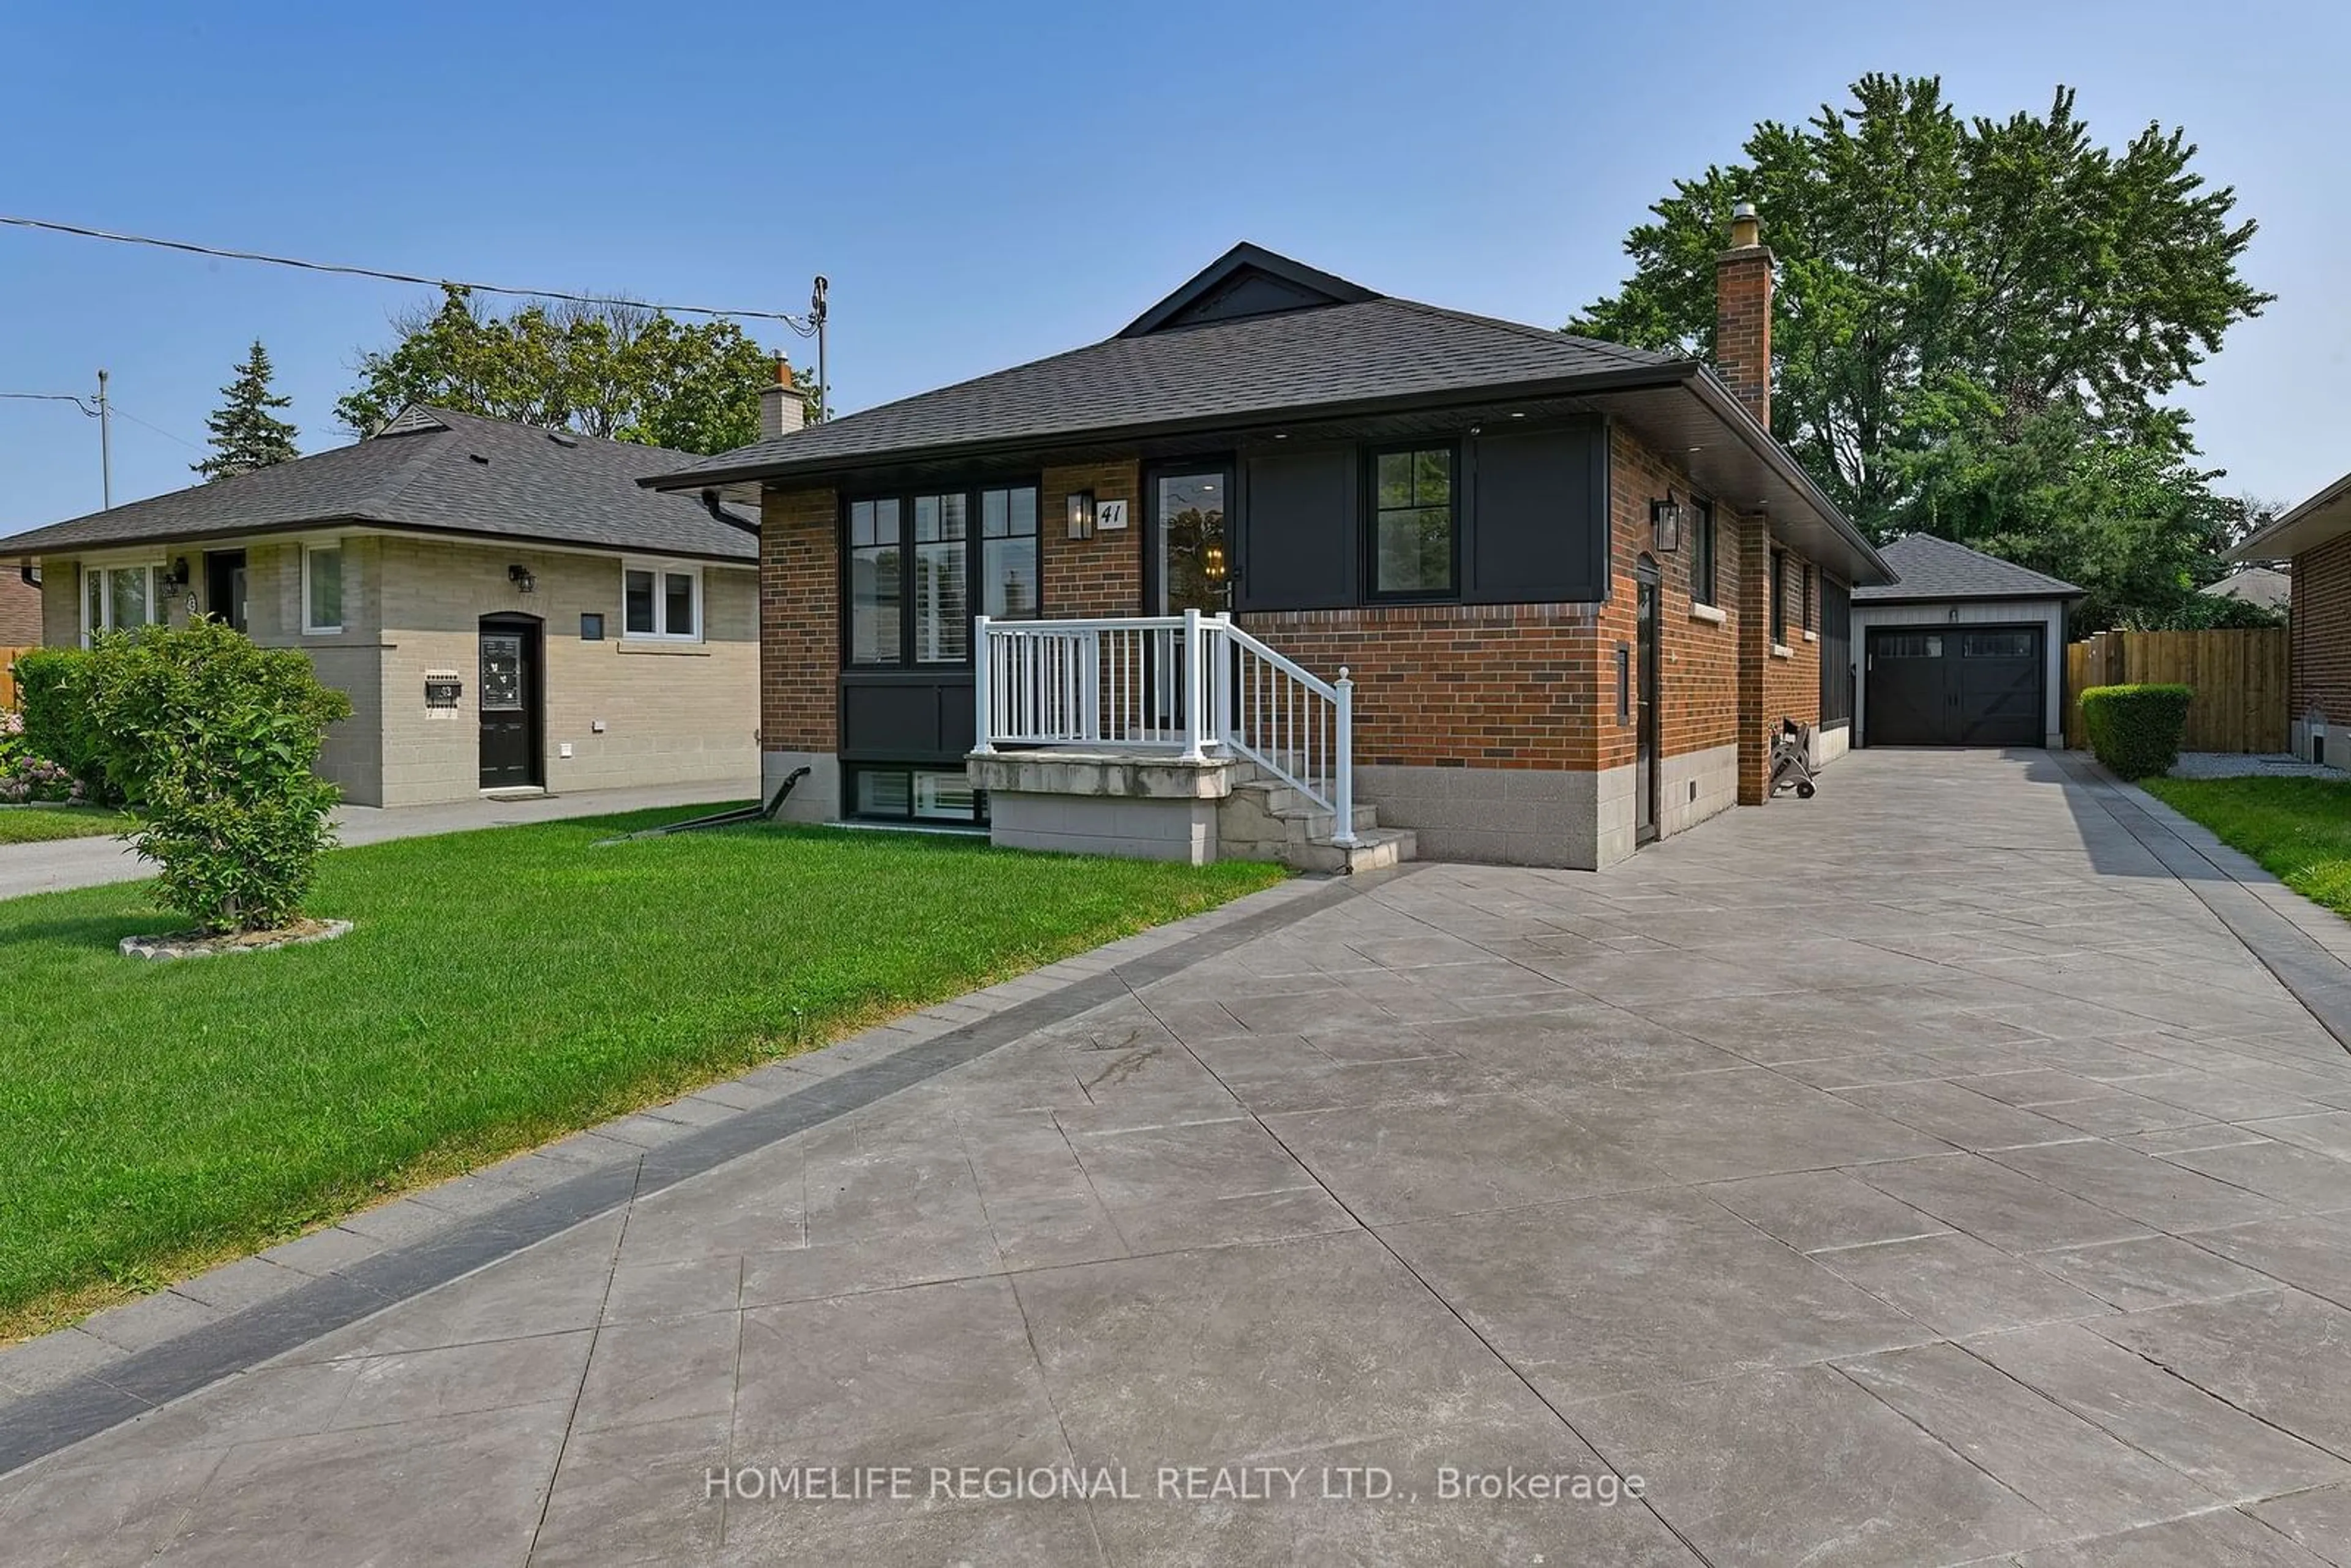 Frontside or backside of a home for 41 Terraview Blvd, Toronto Ontario M1R 4L8